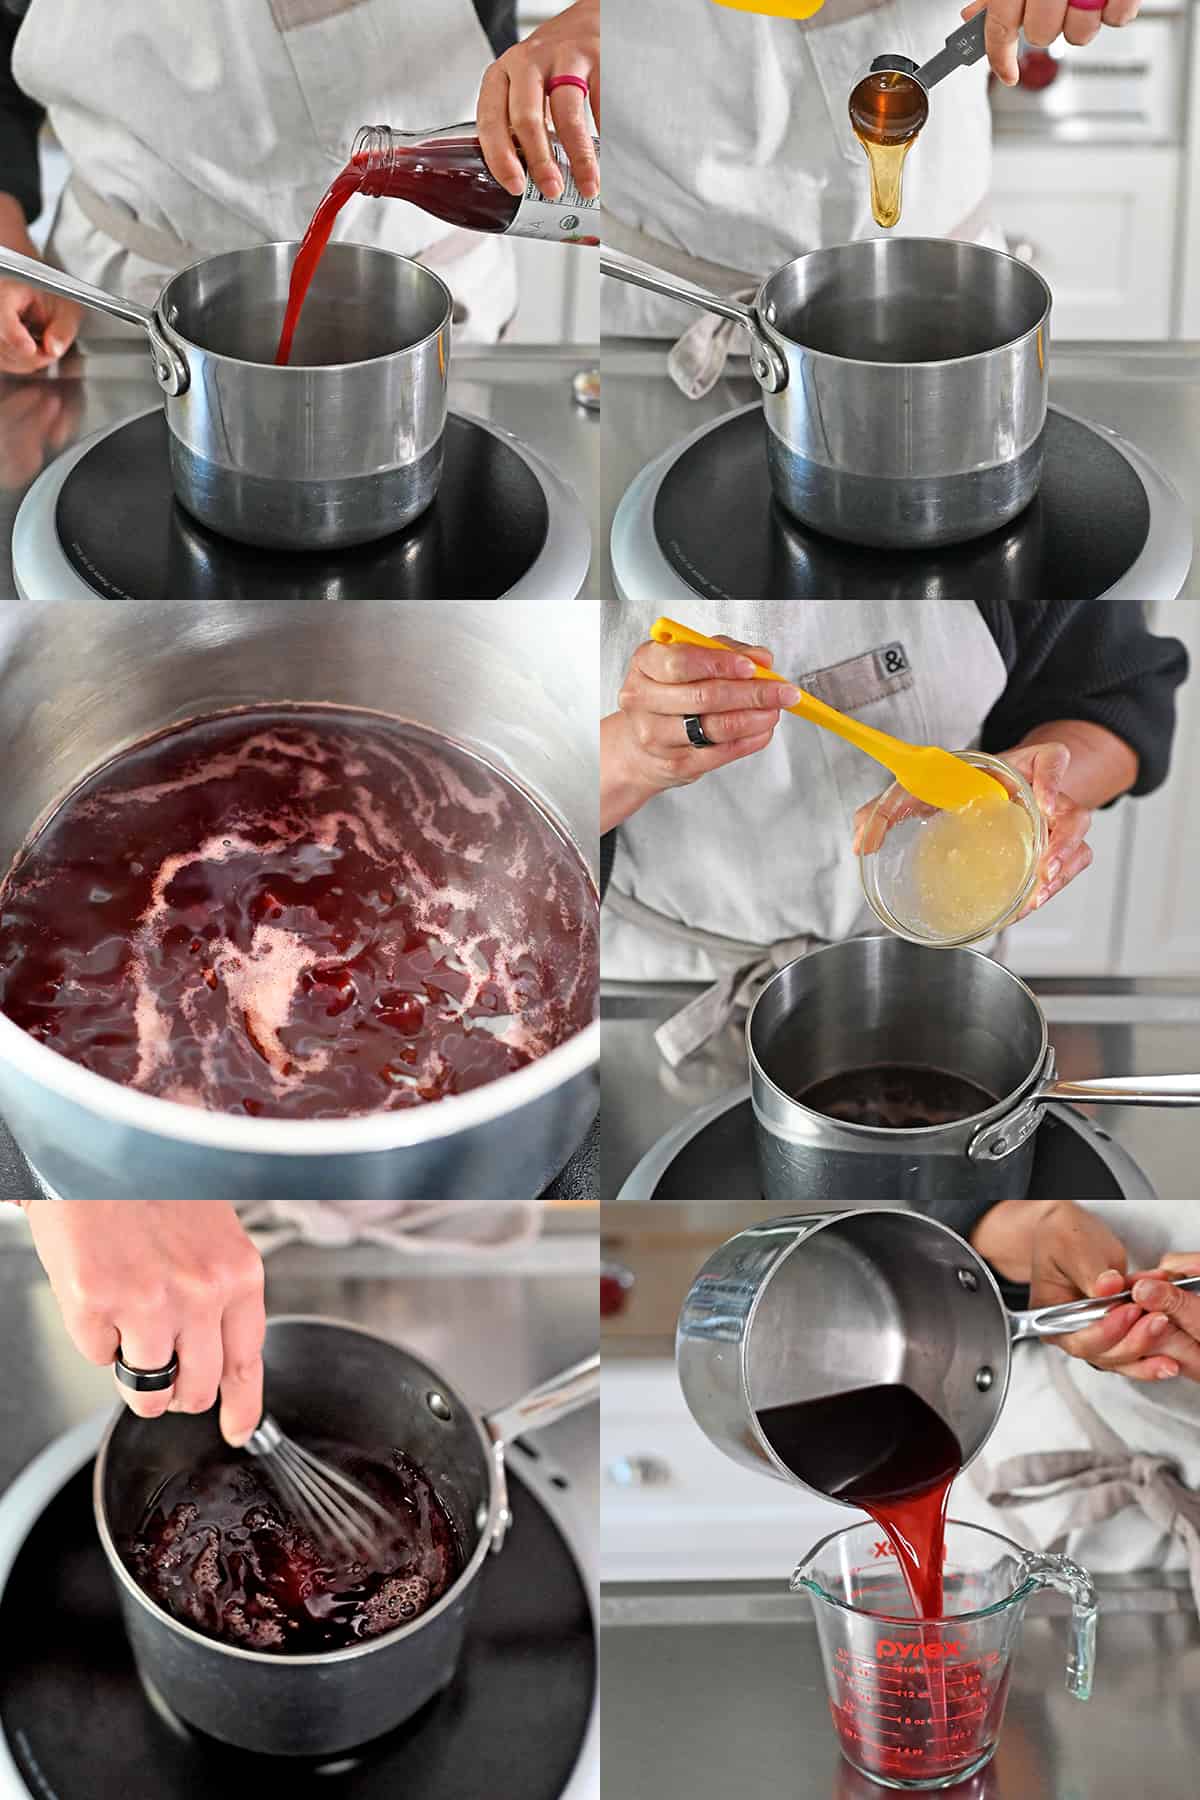 A sequence of photos that show someone simmering strawberry juice and honey before whisking in bloomed gelatin and pouring the resulting red liquid into a measuring cup.